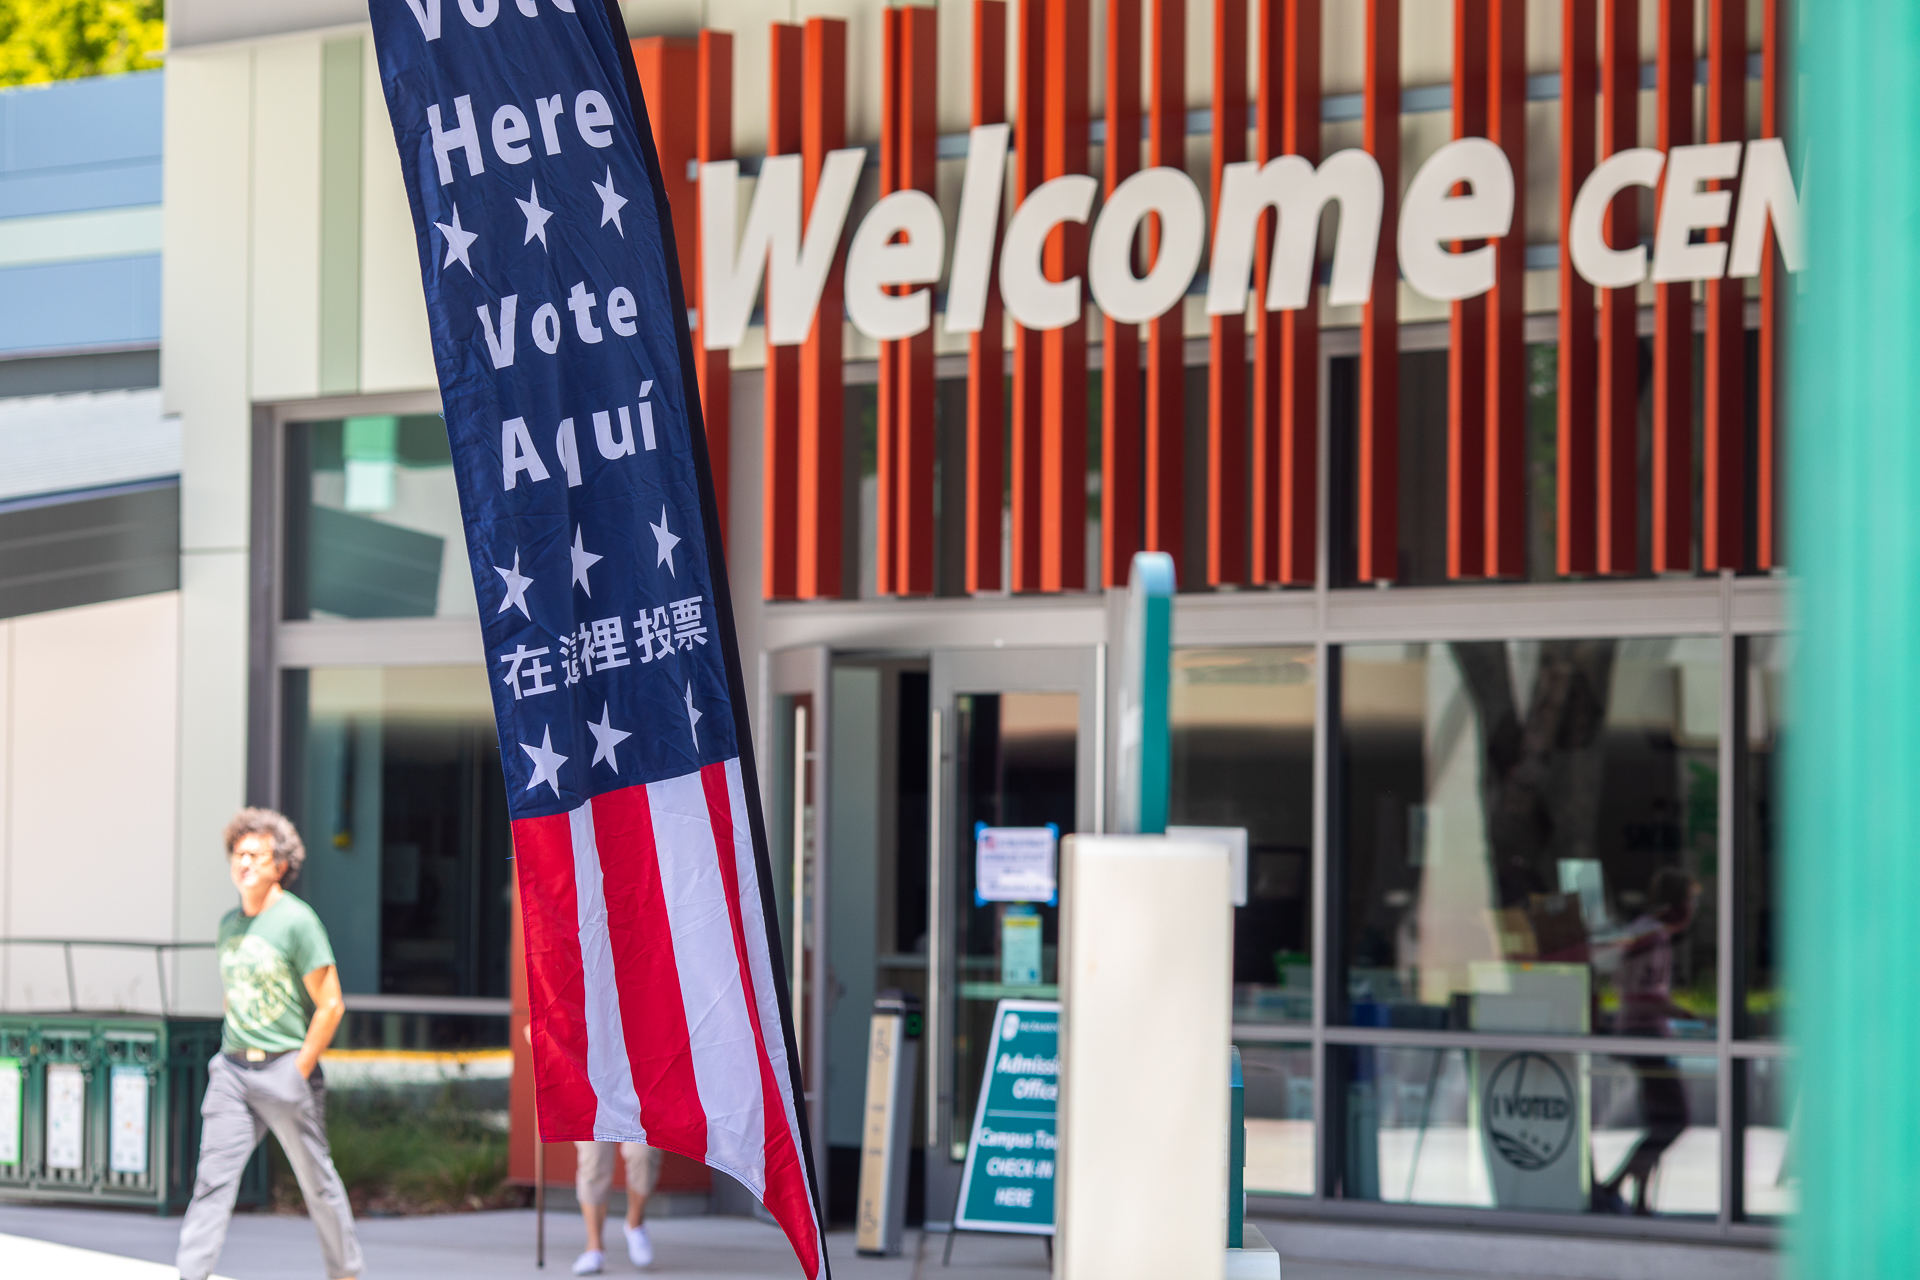 The Sacramento State Welcome Center, with a red, white, and blue flag reading "Vote here" in multiple languages displayed in front.